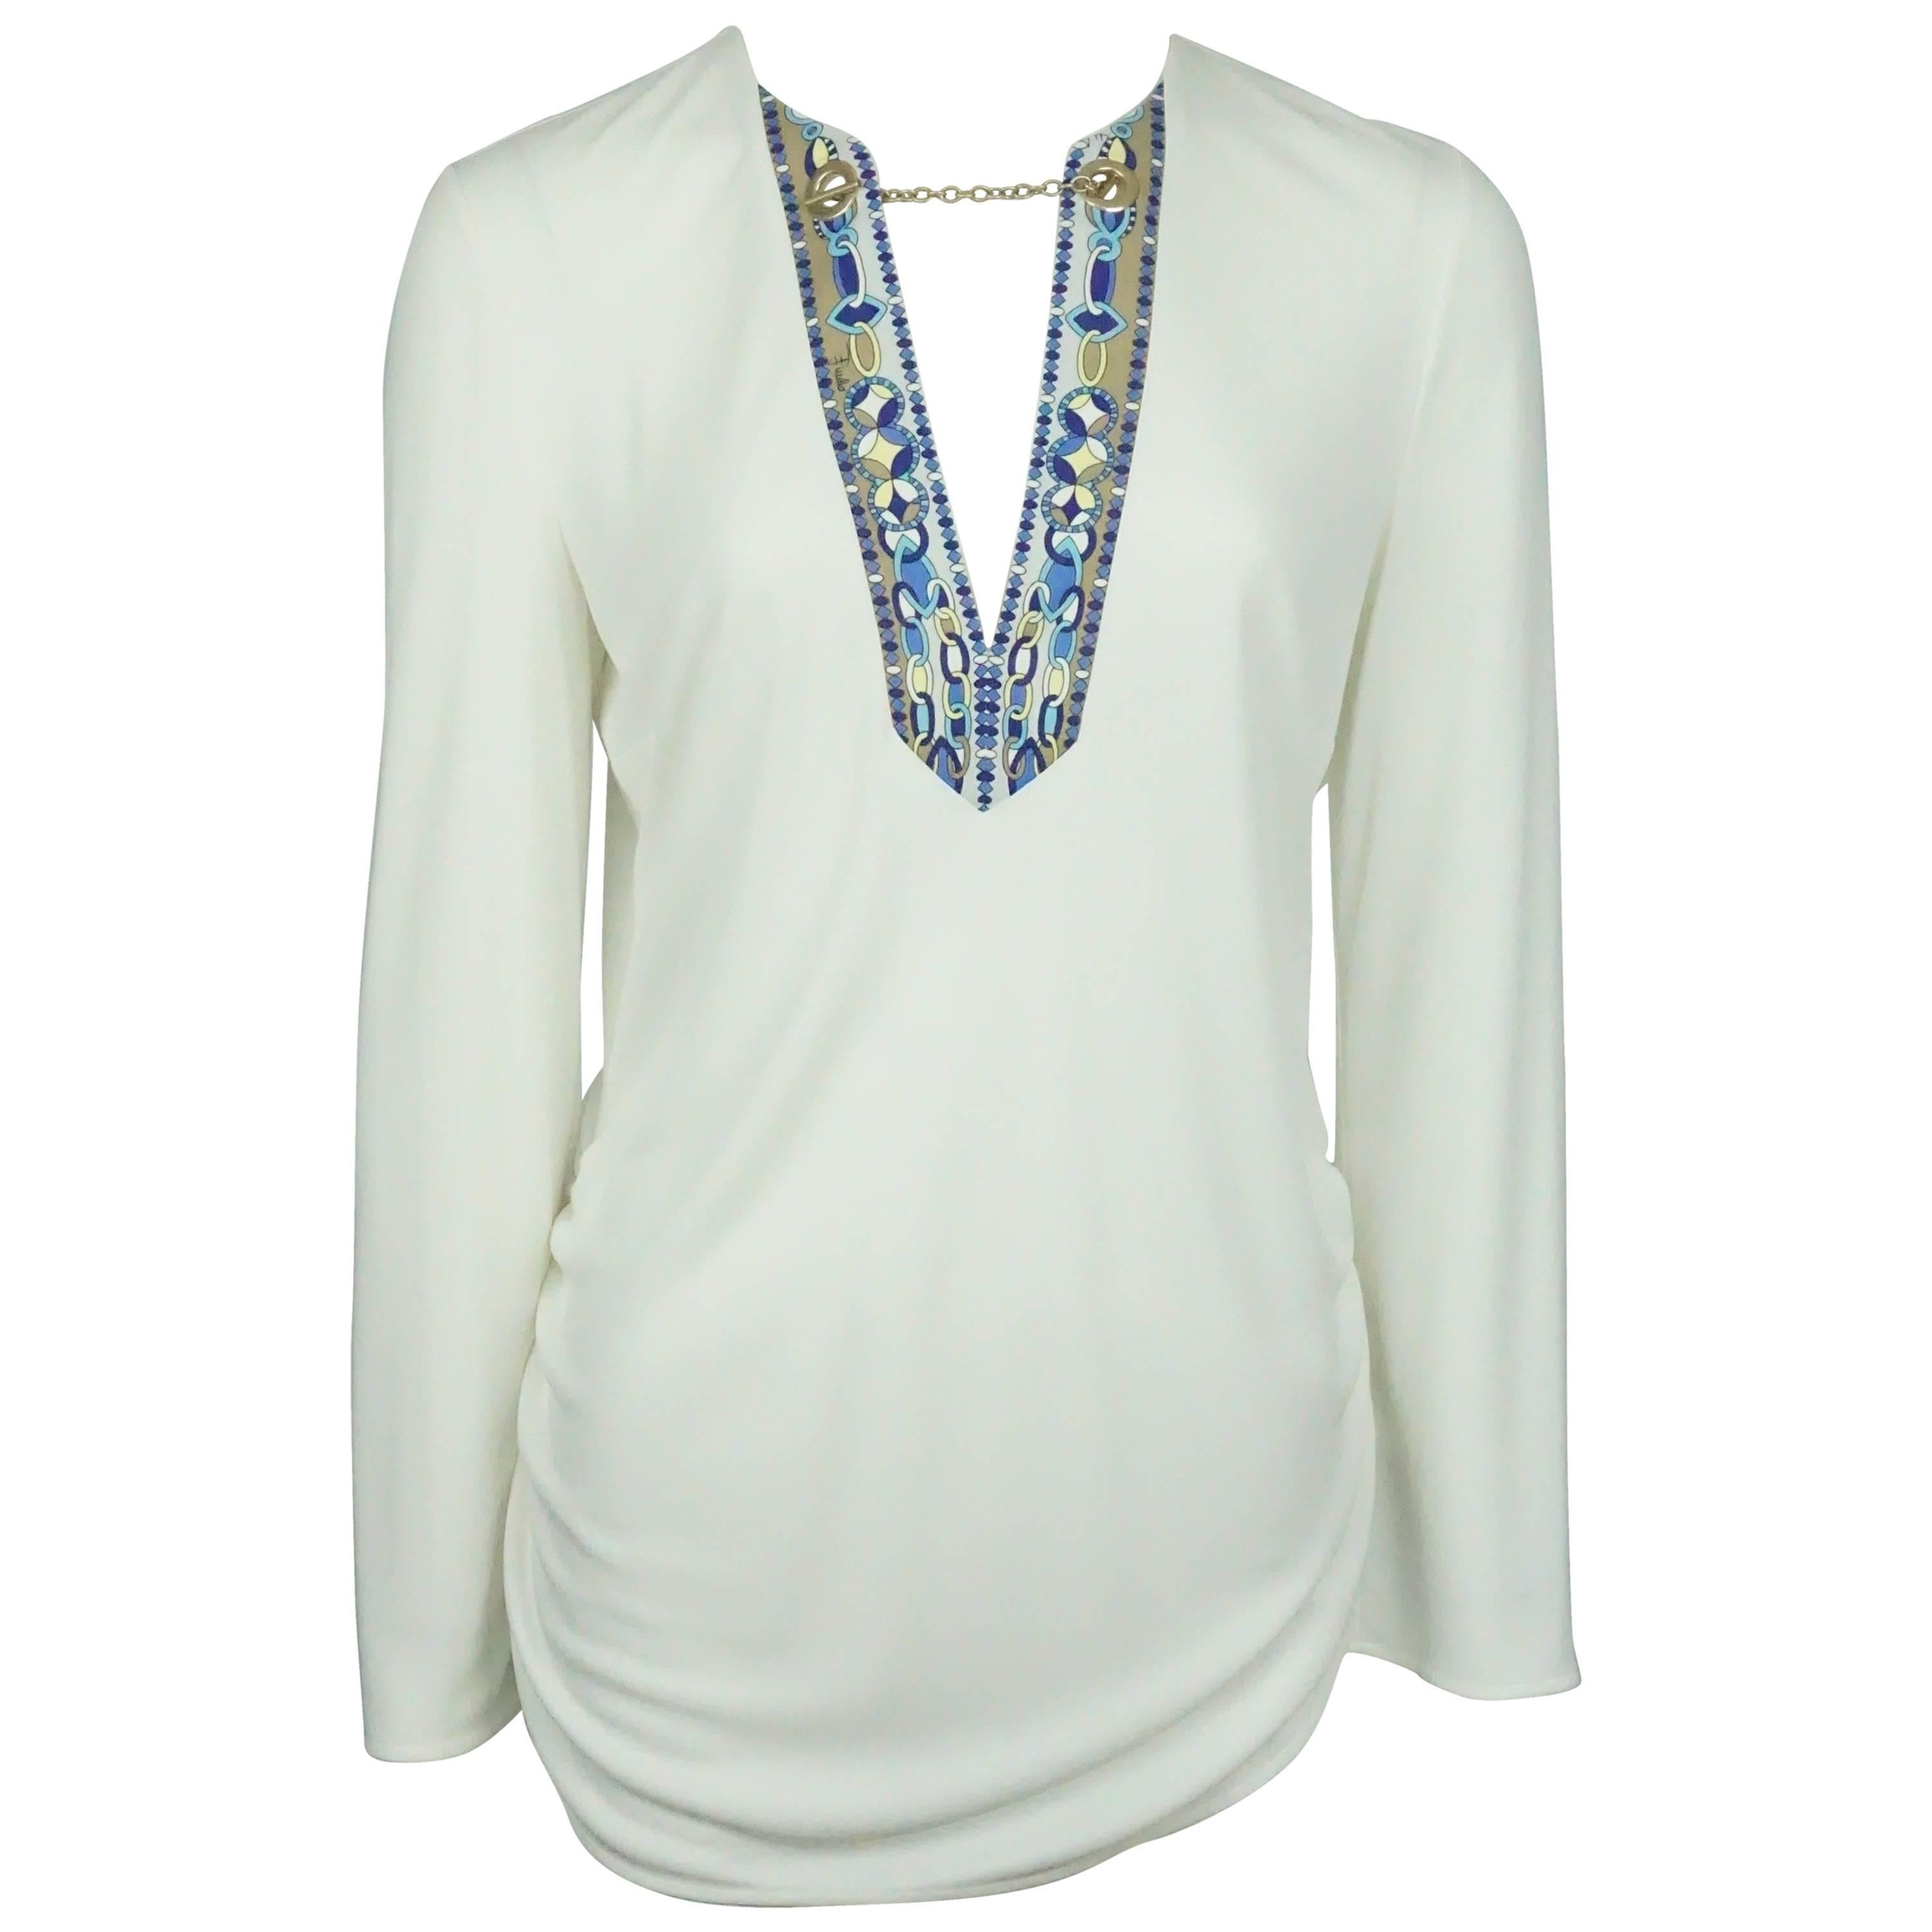 Emilio Pucci Ivory Silk L/S Top w/ Blue Print and Chain Detail - 40